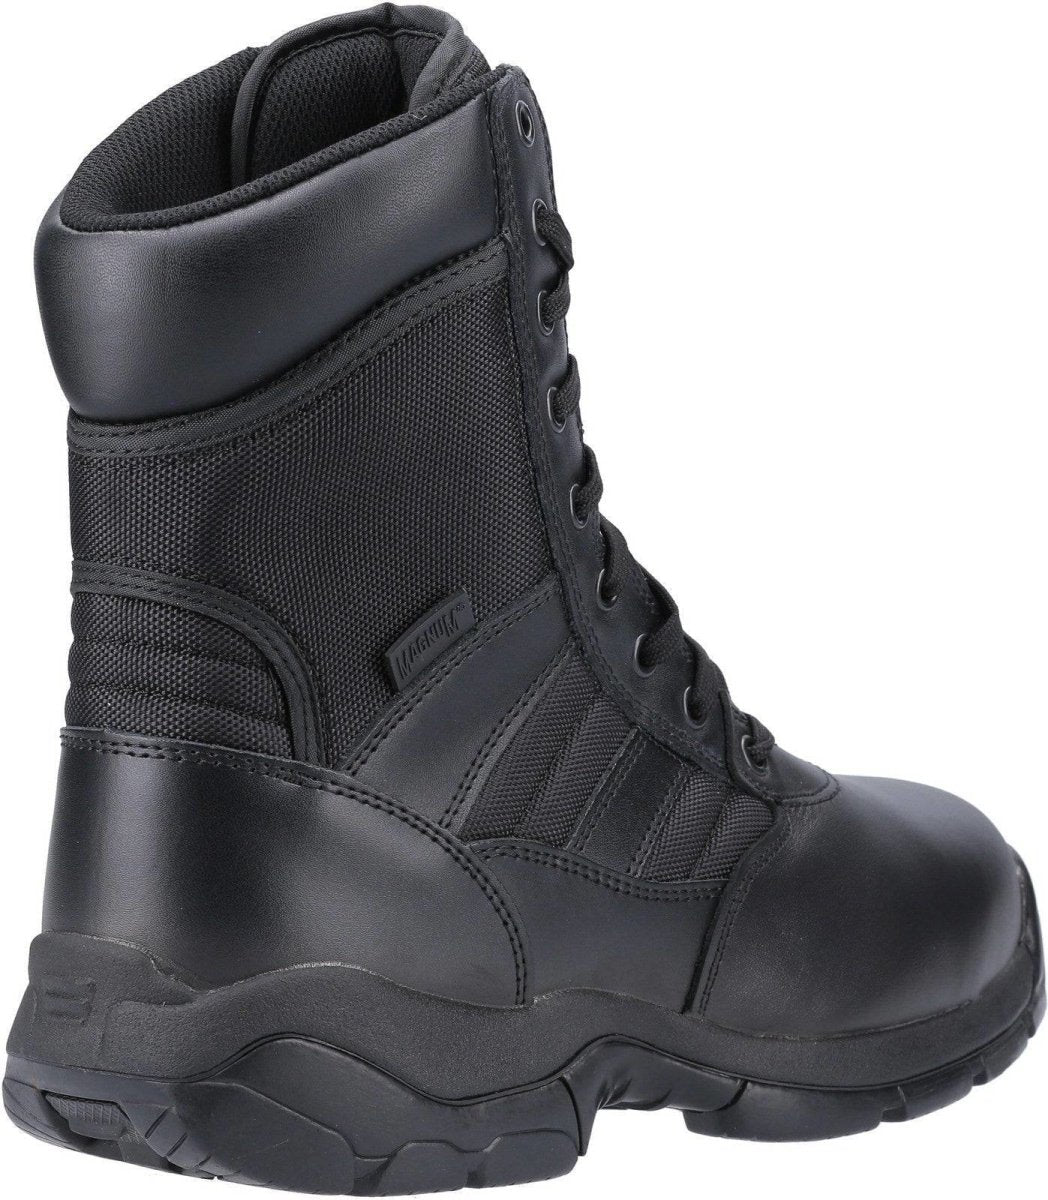 Magnum Panther 8.0 Steel Toe Mens Safety Boots - Shoe Store Direct